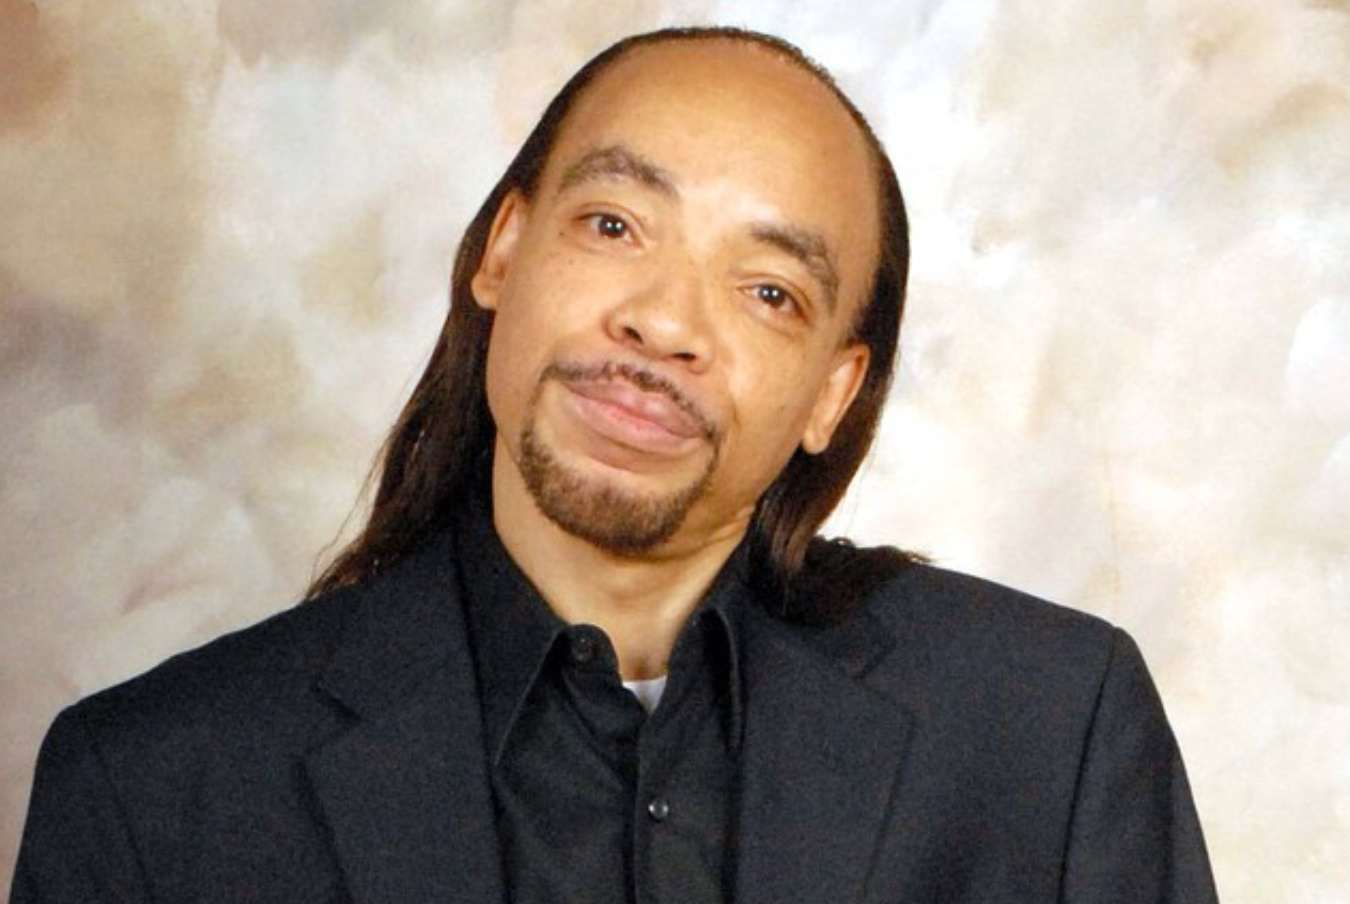 Kidd Creole Of Grandmaster Flash & The Furious Five Convicted Of Manslaughter (1)